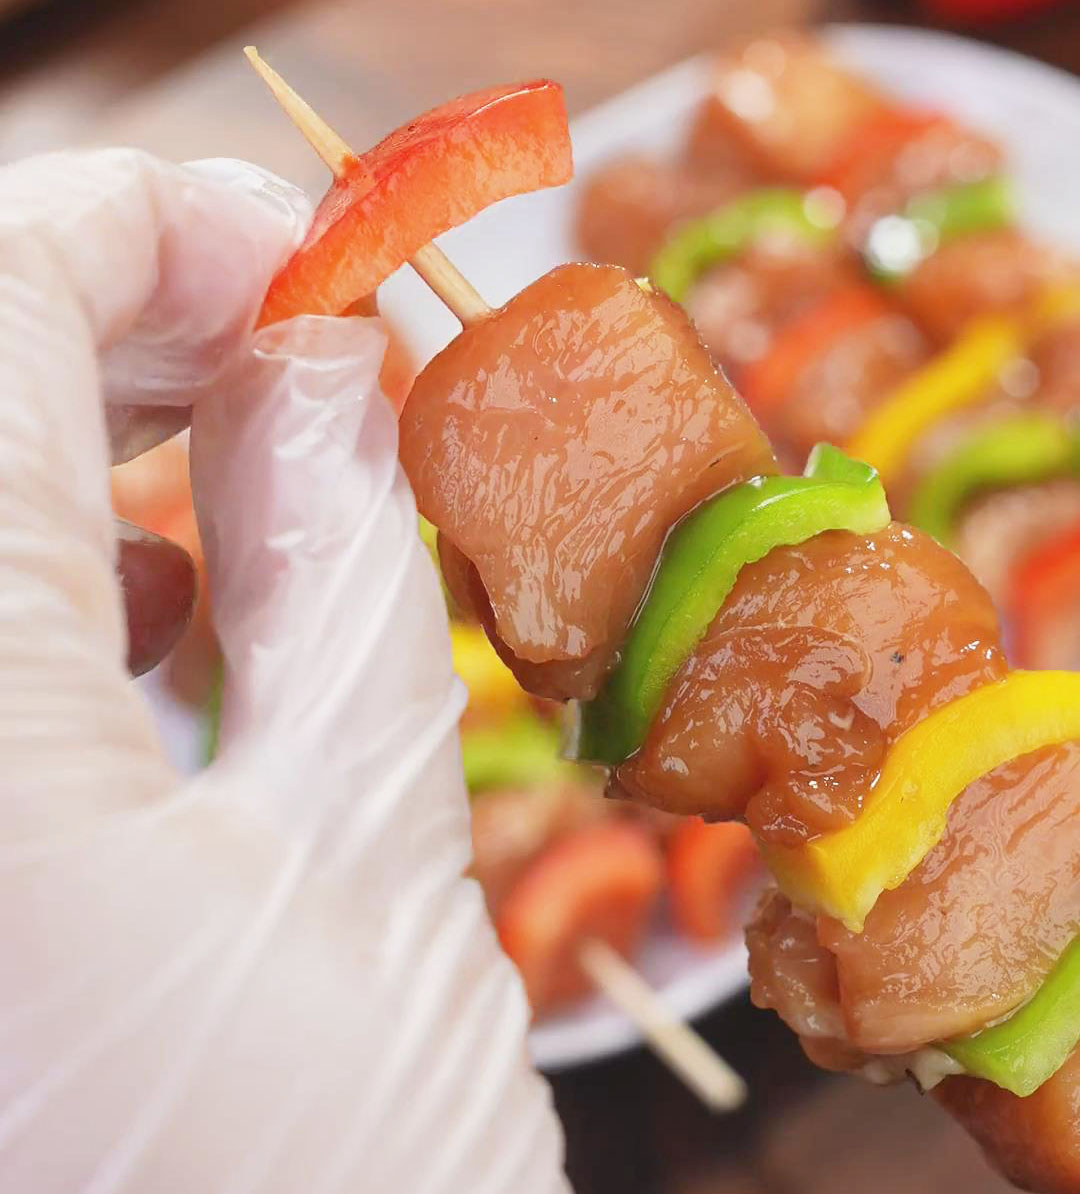 insert the marinated chicken and bell pepper slices into the skewers